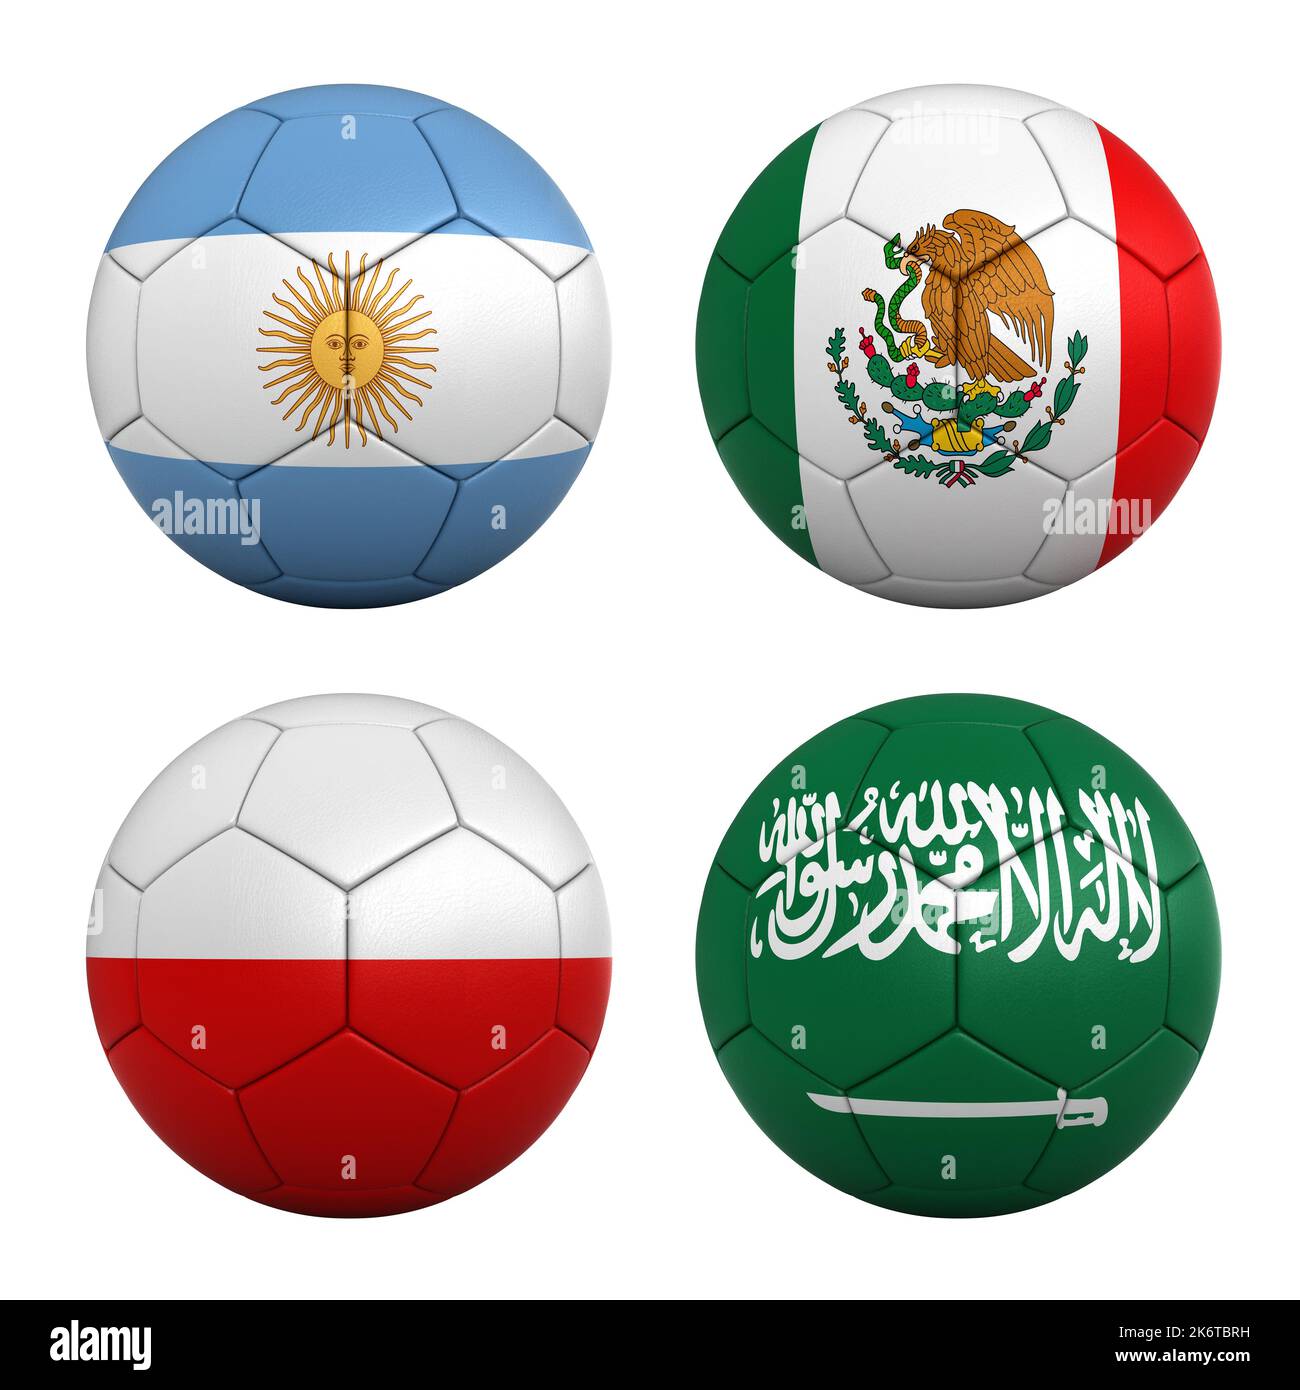 Football balls with the flags of the teams in Group C of the FIFA World Cup 2022 - Argentina, Mexico, Poland and Saudi Arabia Stock Photo